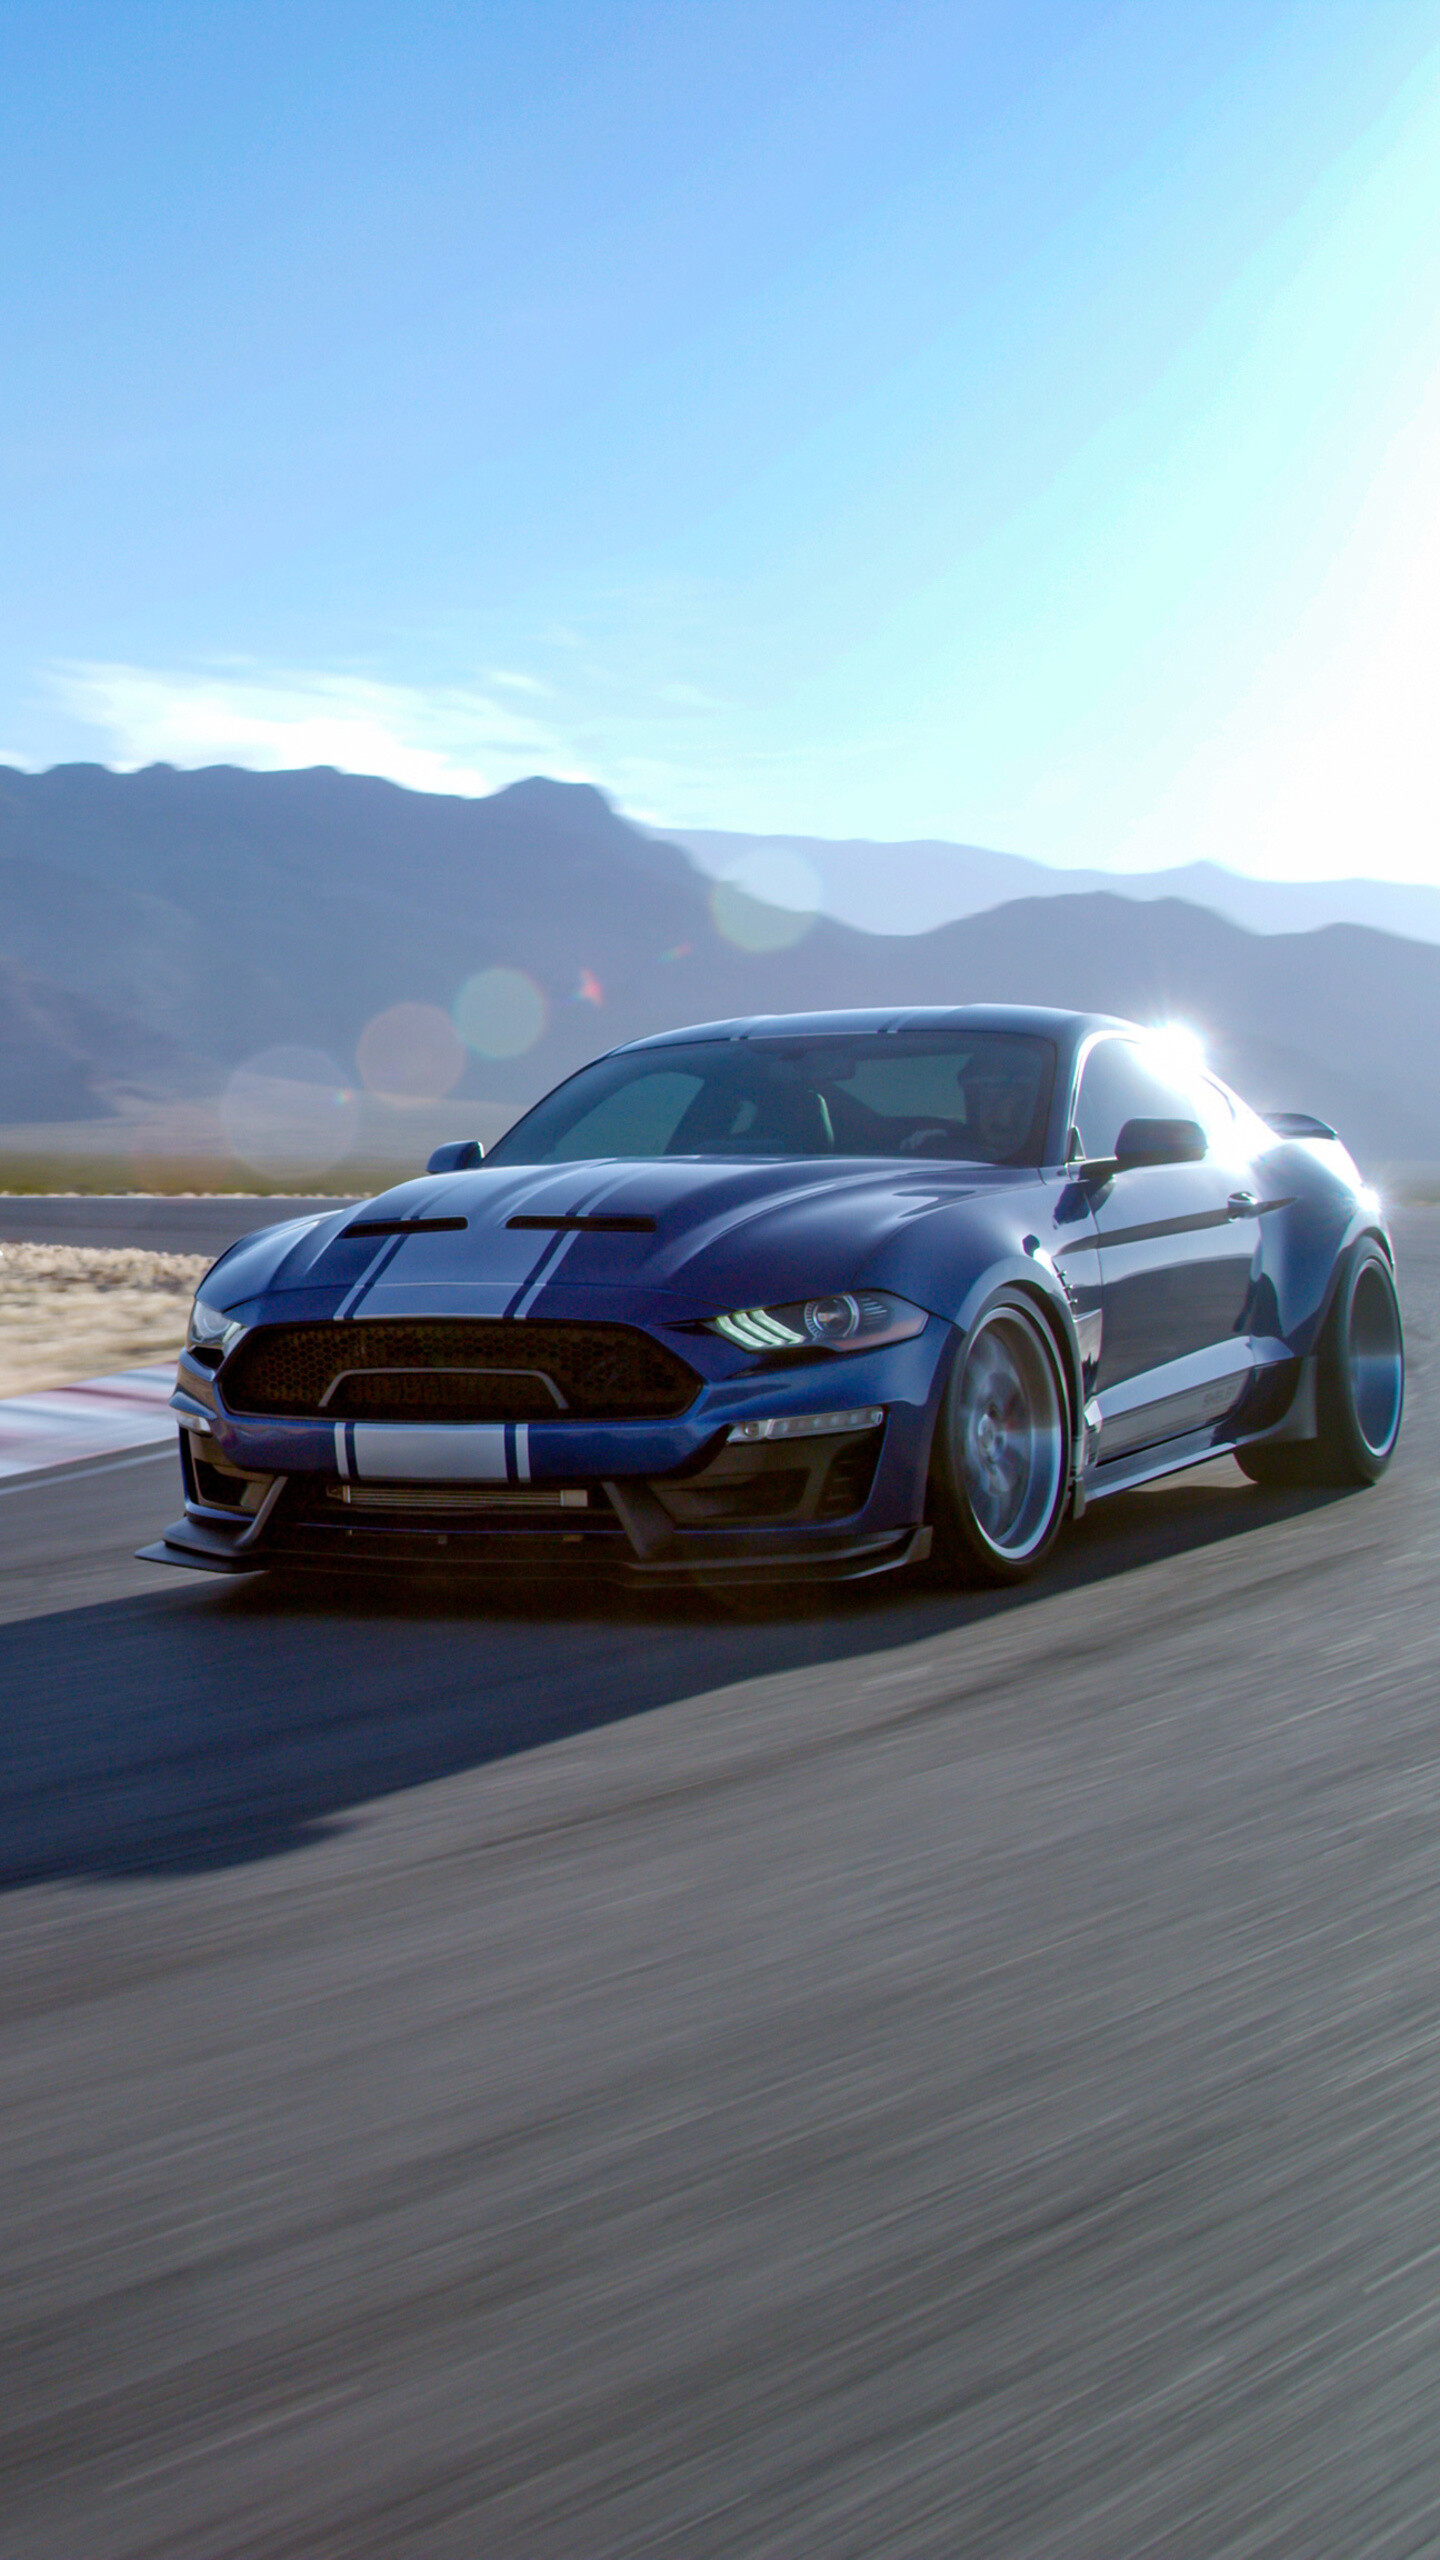 Ford: Mustang Shelby GT350, 5.2L V8 engine. 1440x2560 HD Wallpaper.